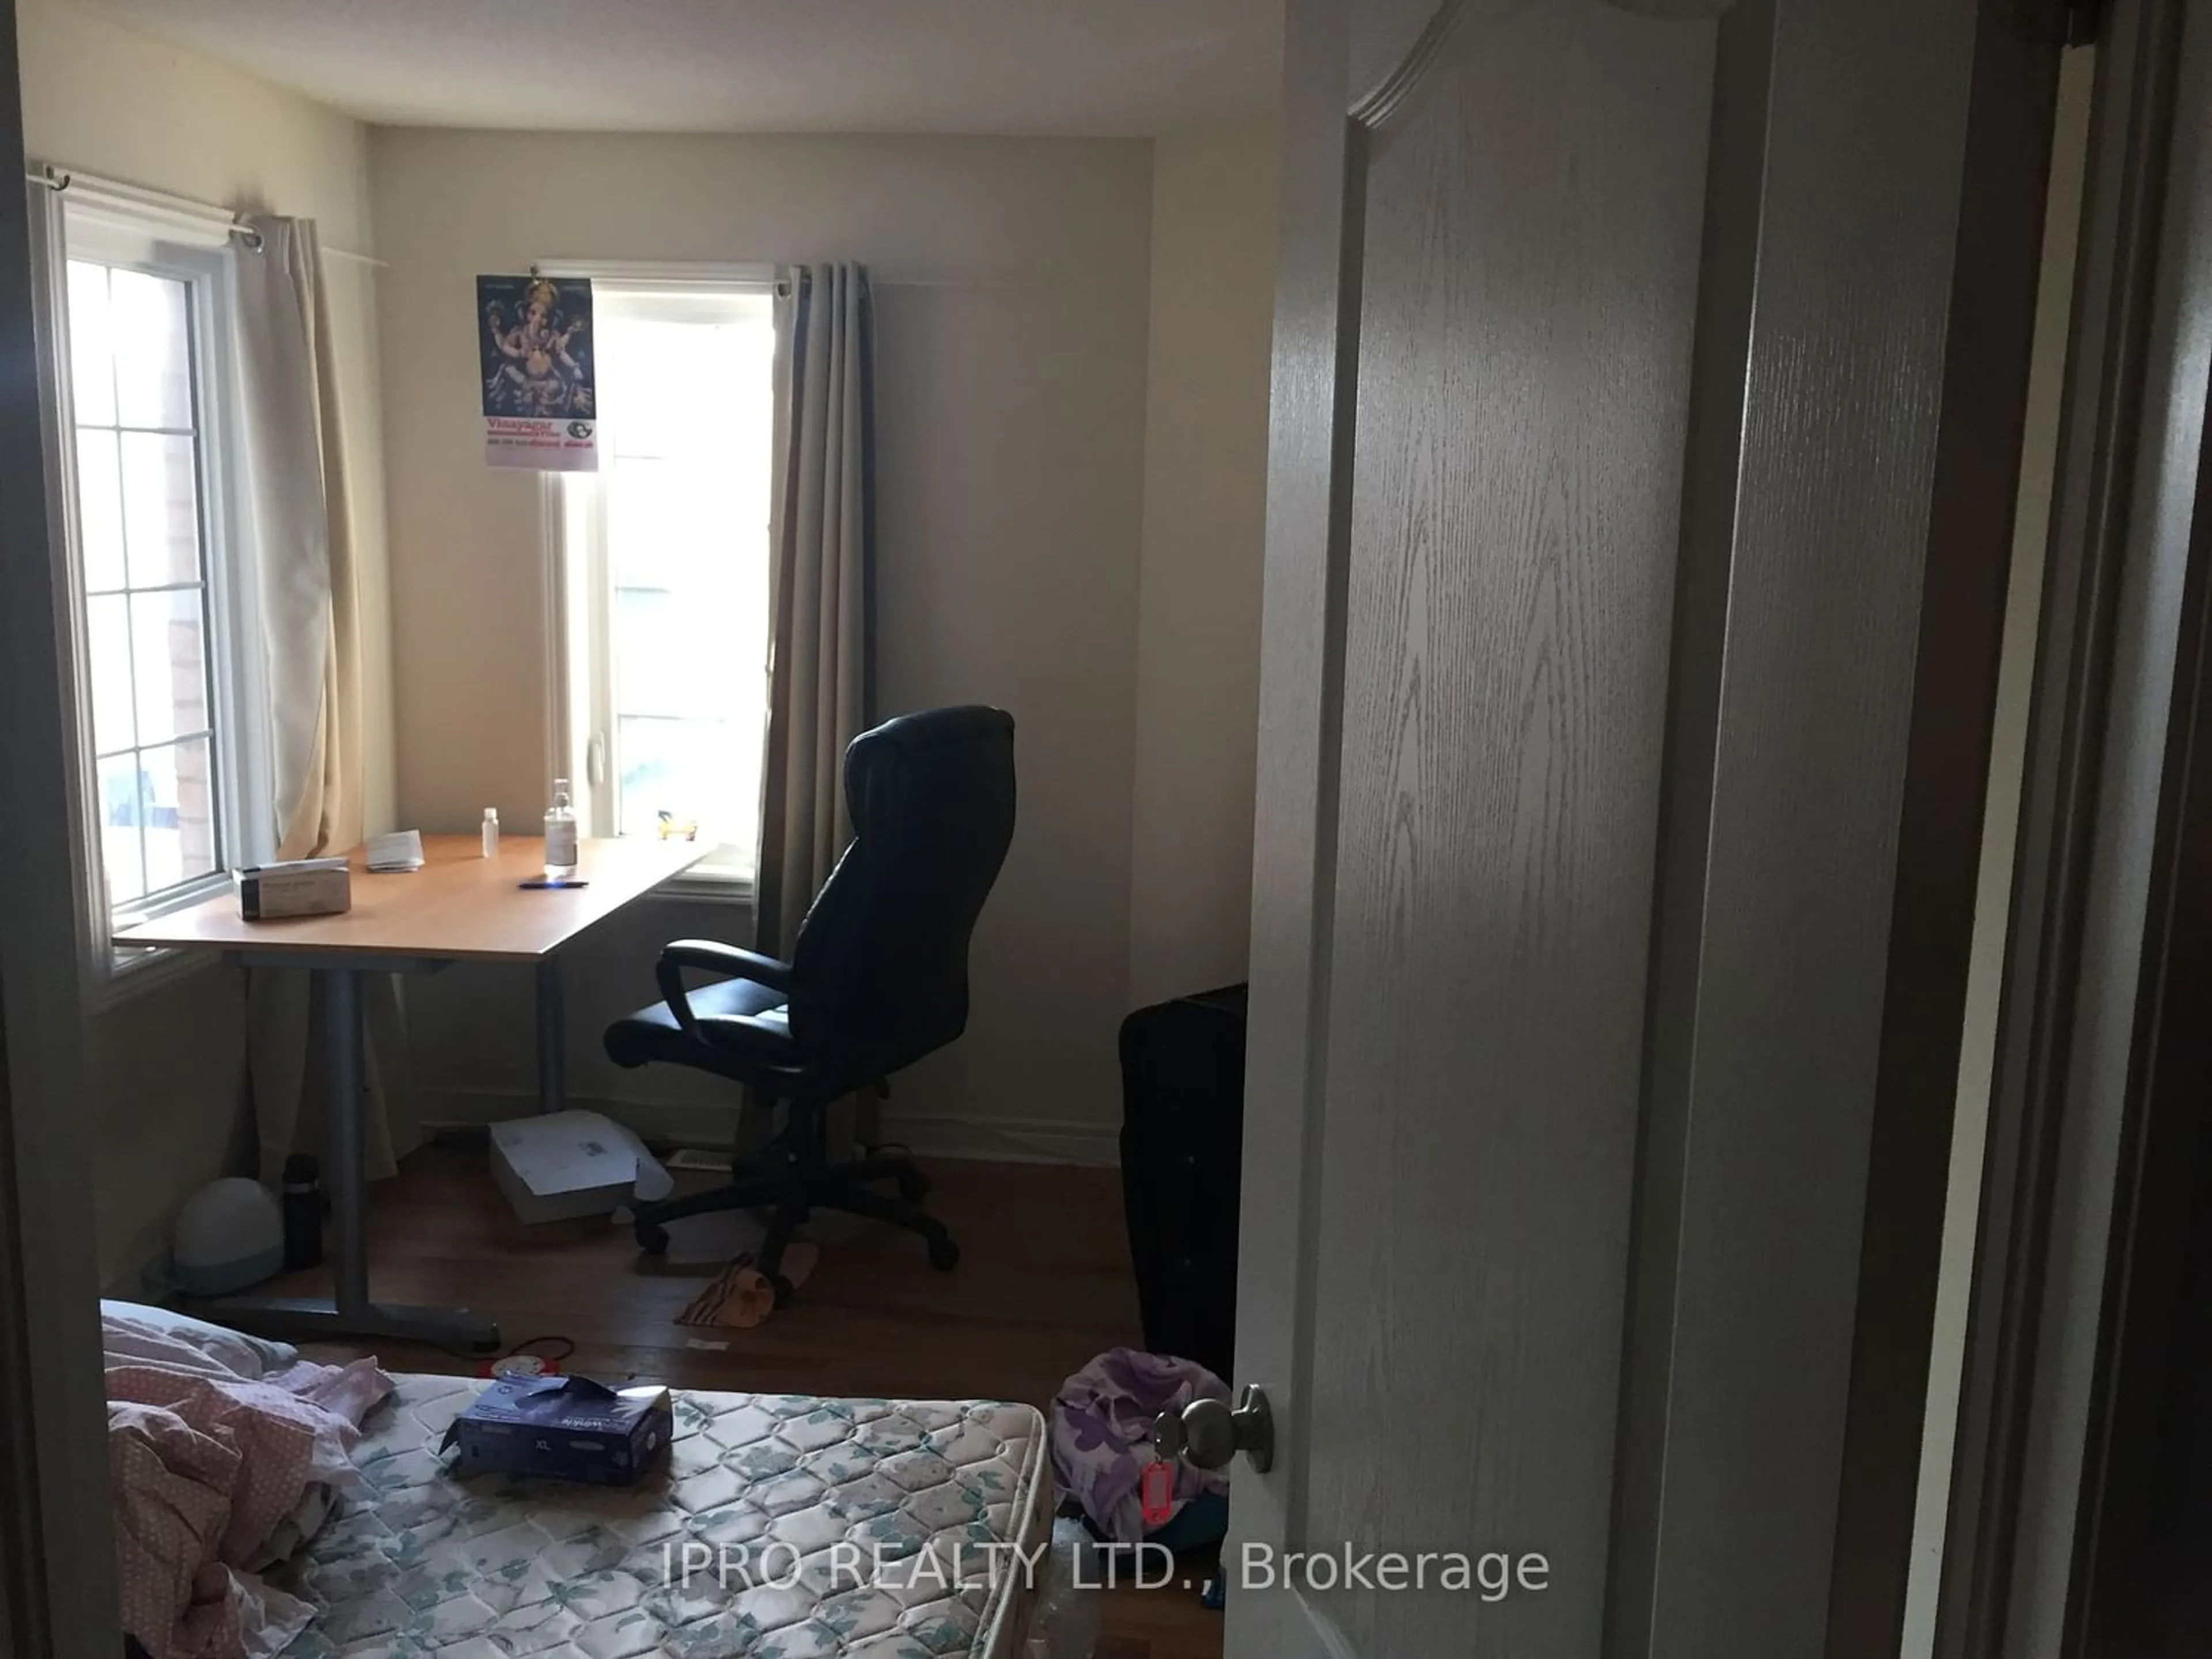 A pic of a room for 4694 Centretown Way, Mississauga Ontario L5R 0C9